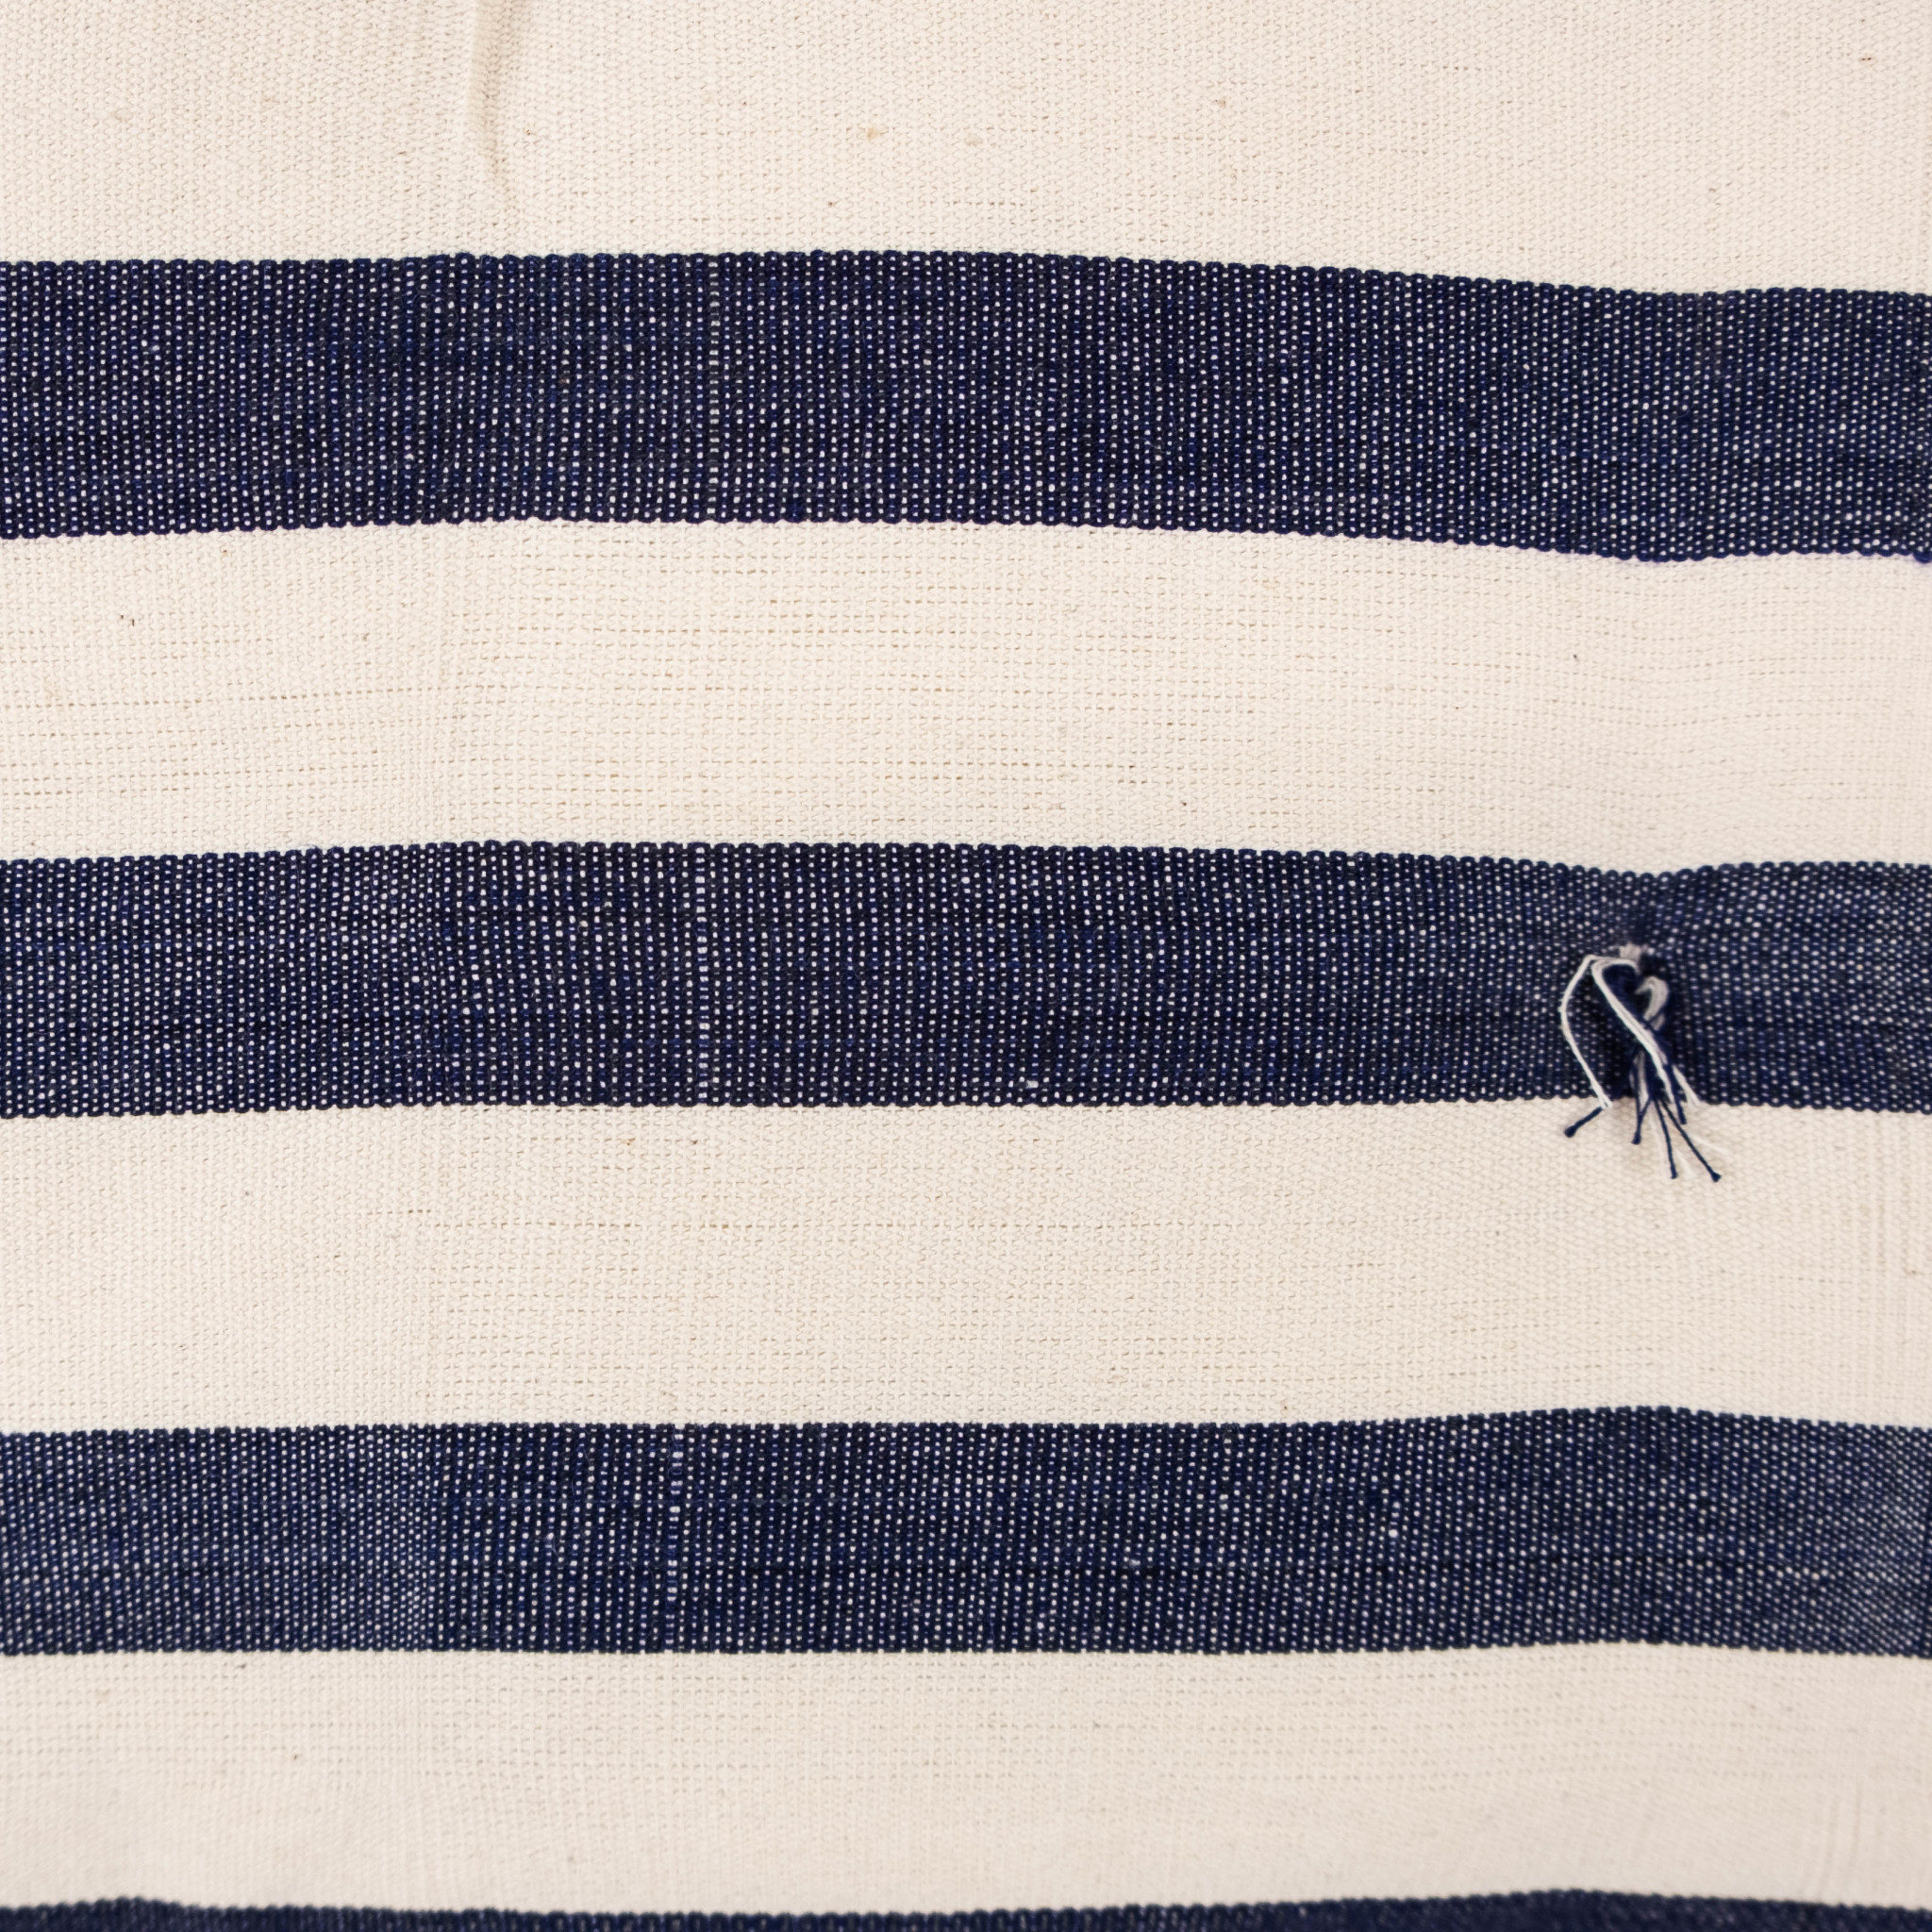 TENSIRA Handwoven Chair Cushion in White and Navy Wide Stripe 16 x 16"